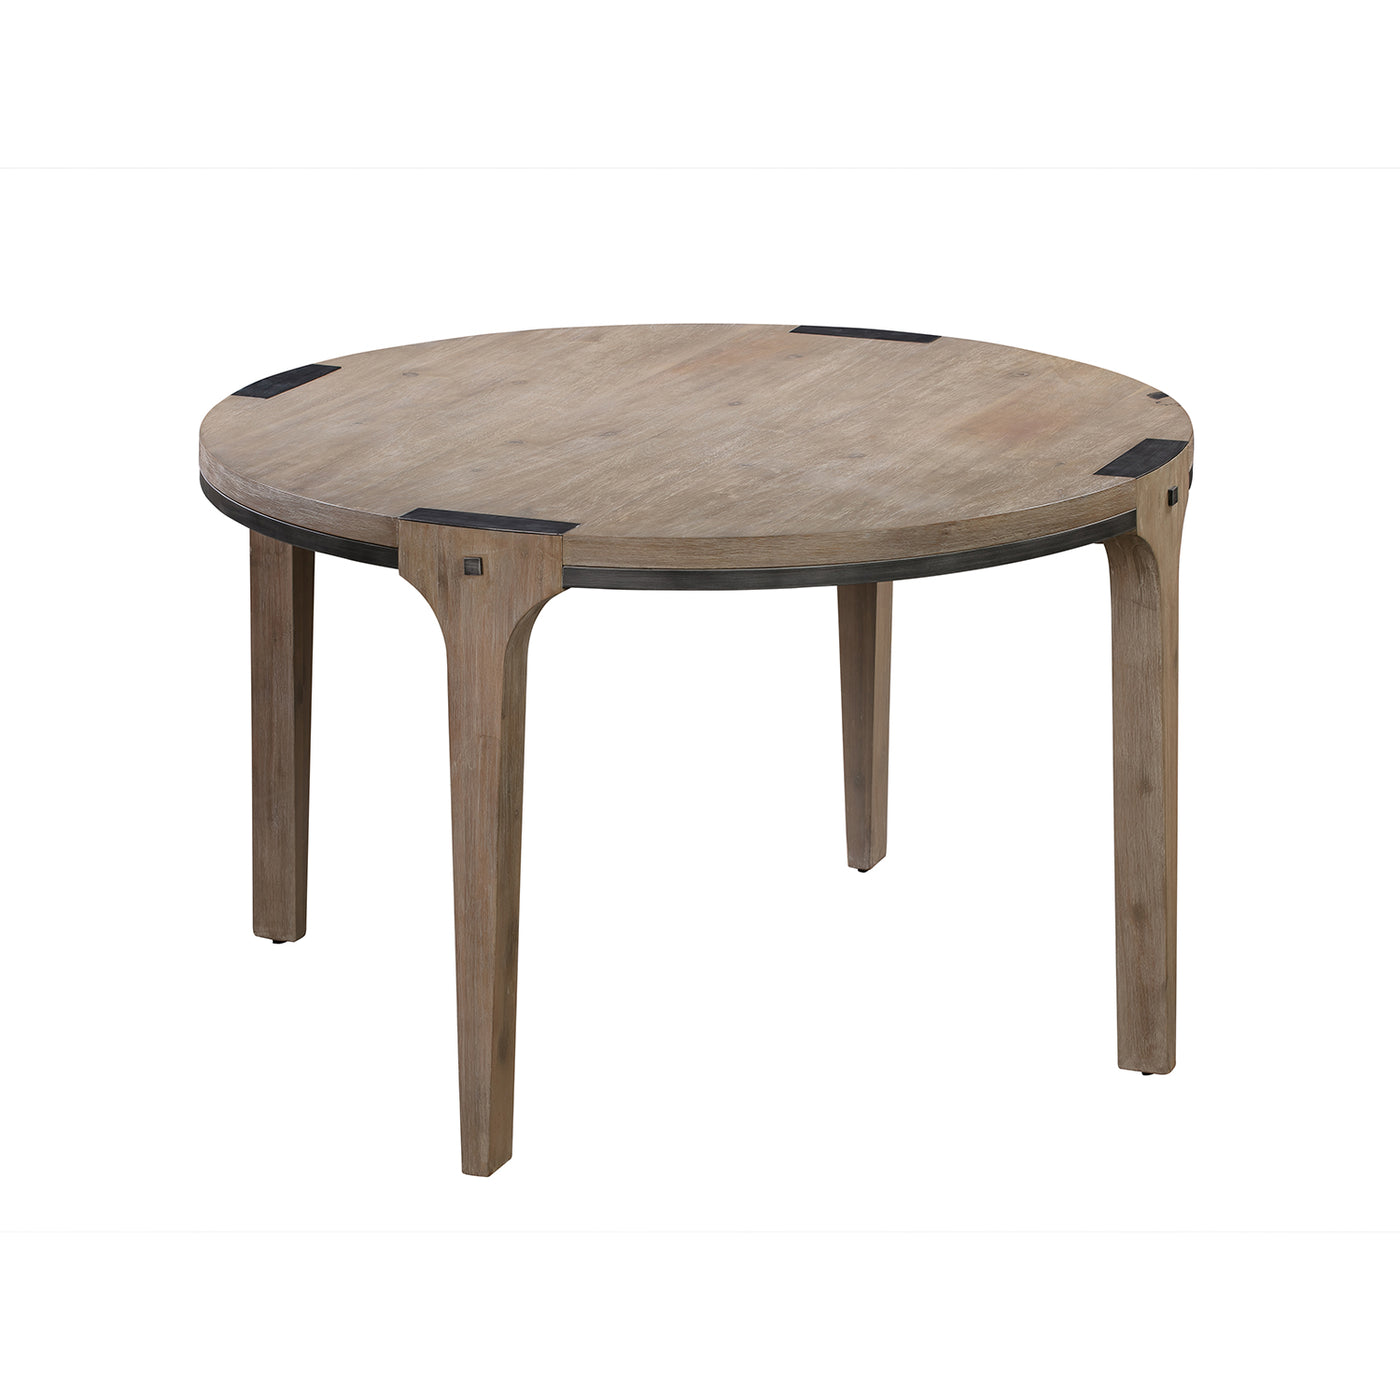 Iman Small Round Dining Table in Light Brown Finish